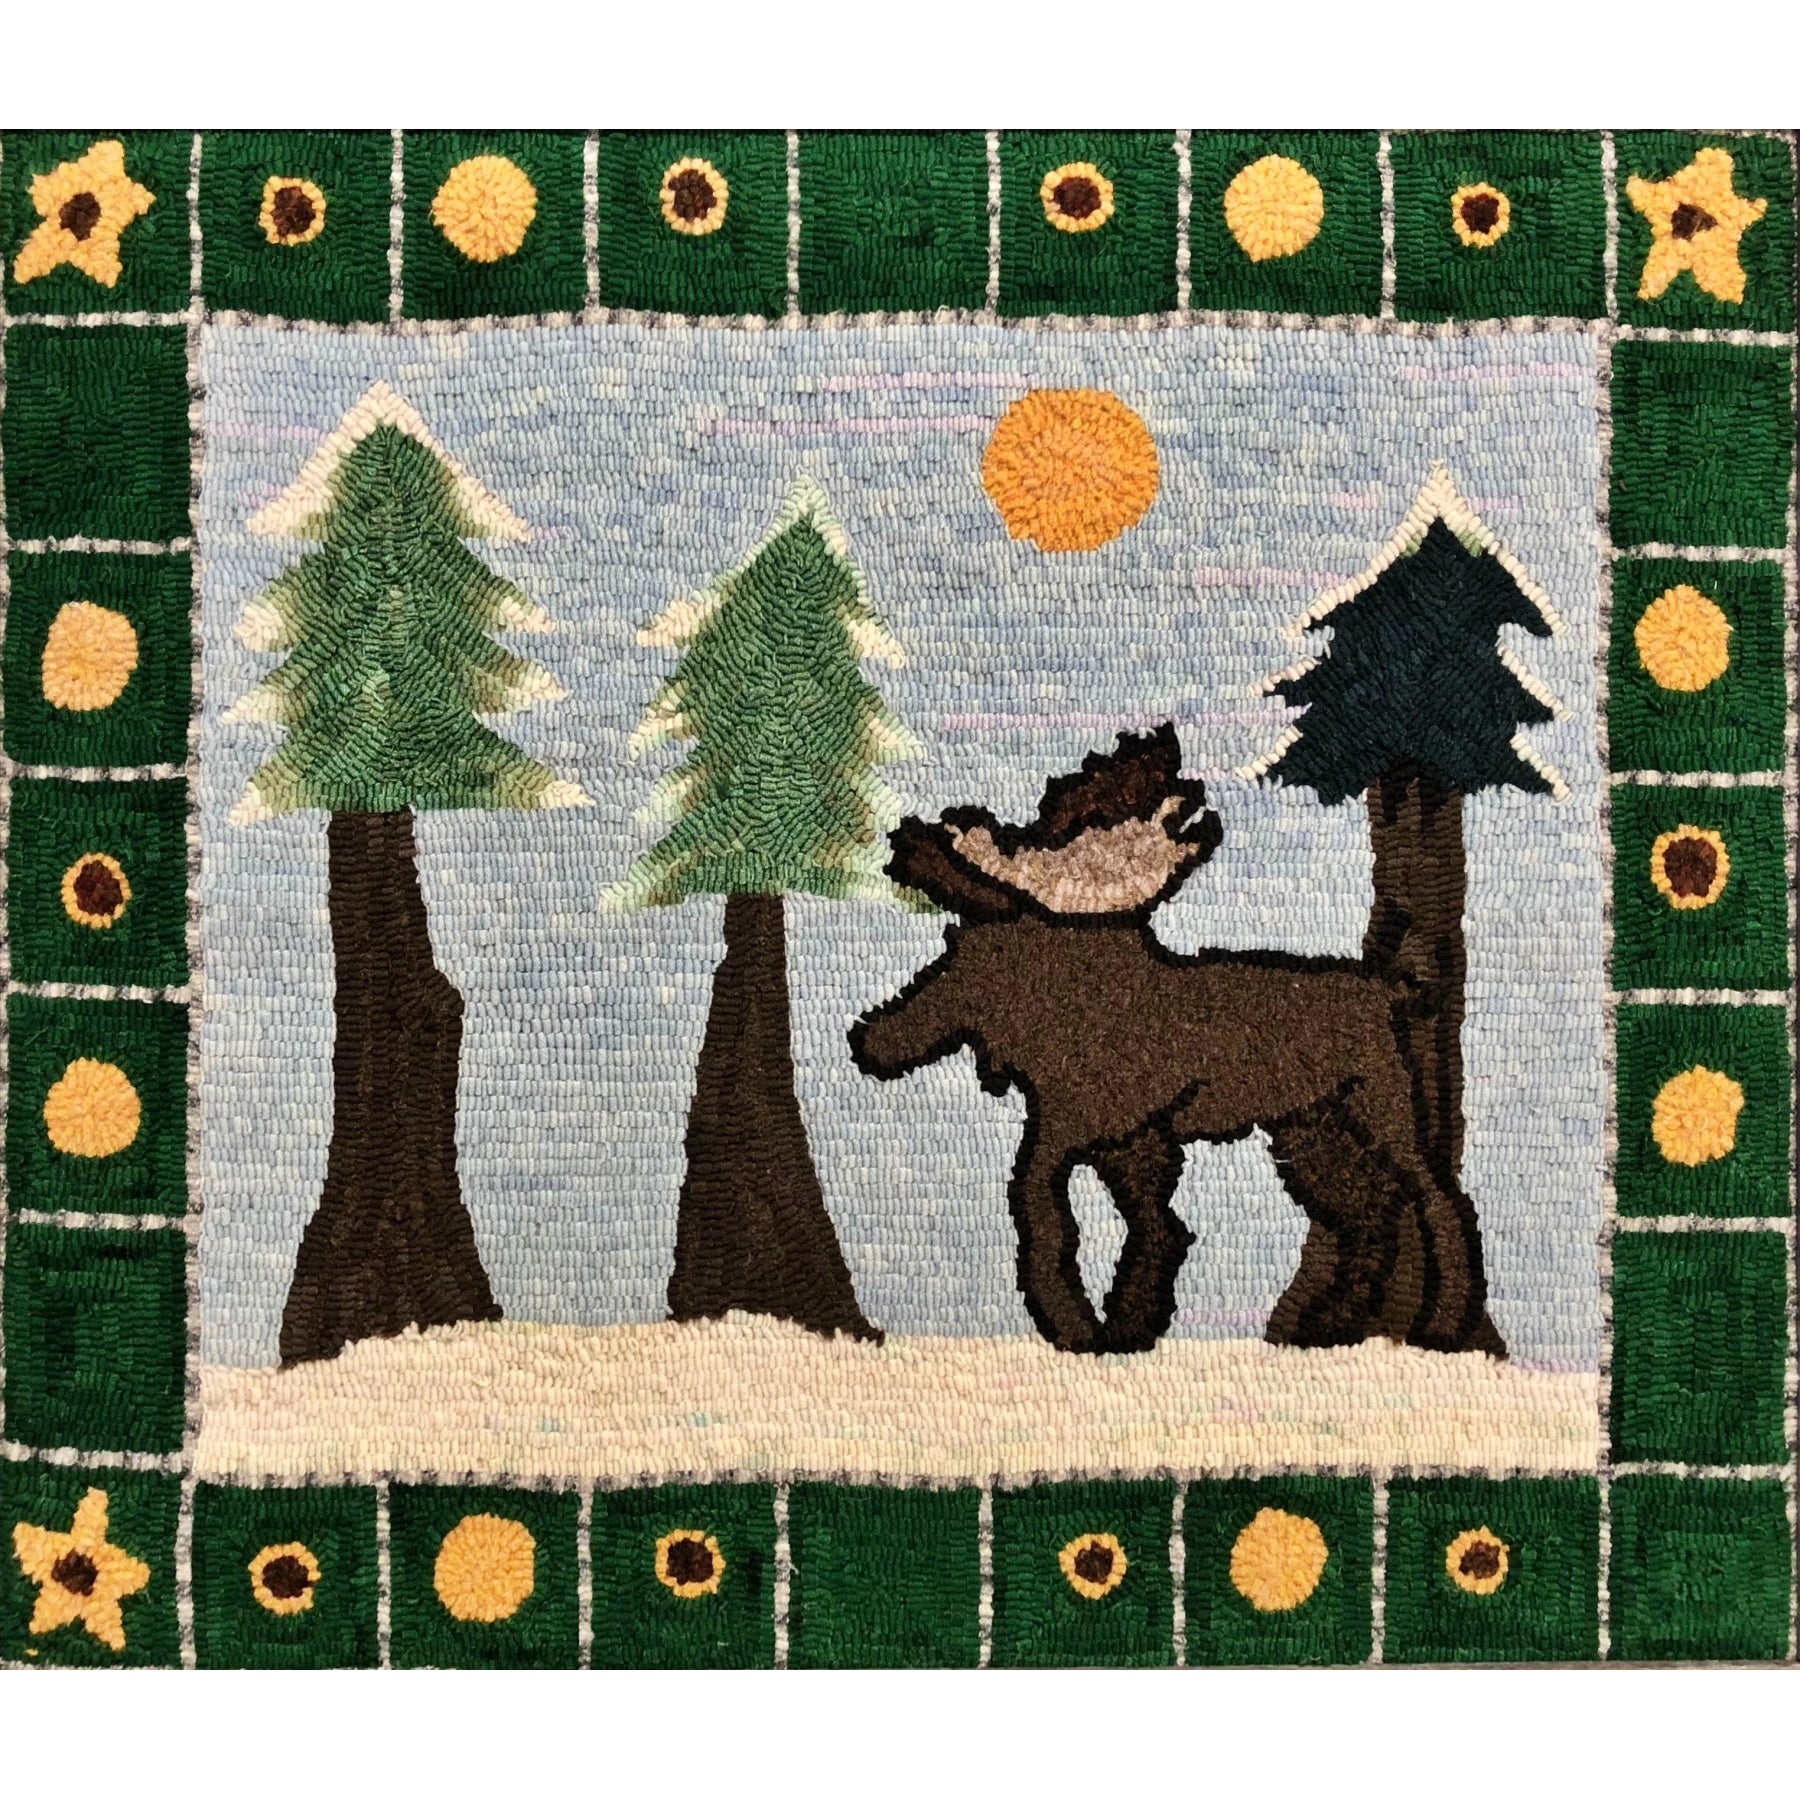 Moose, rug hooked by Carol LaChance